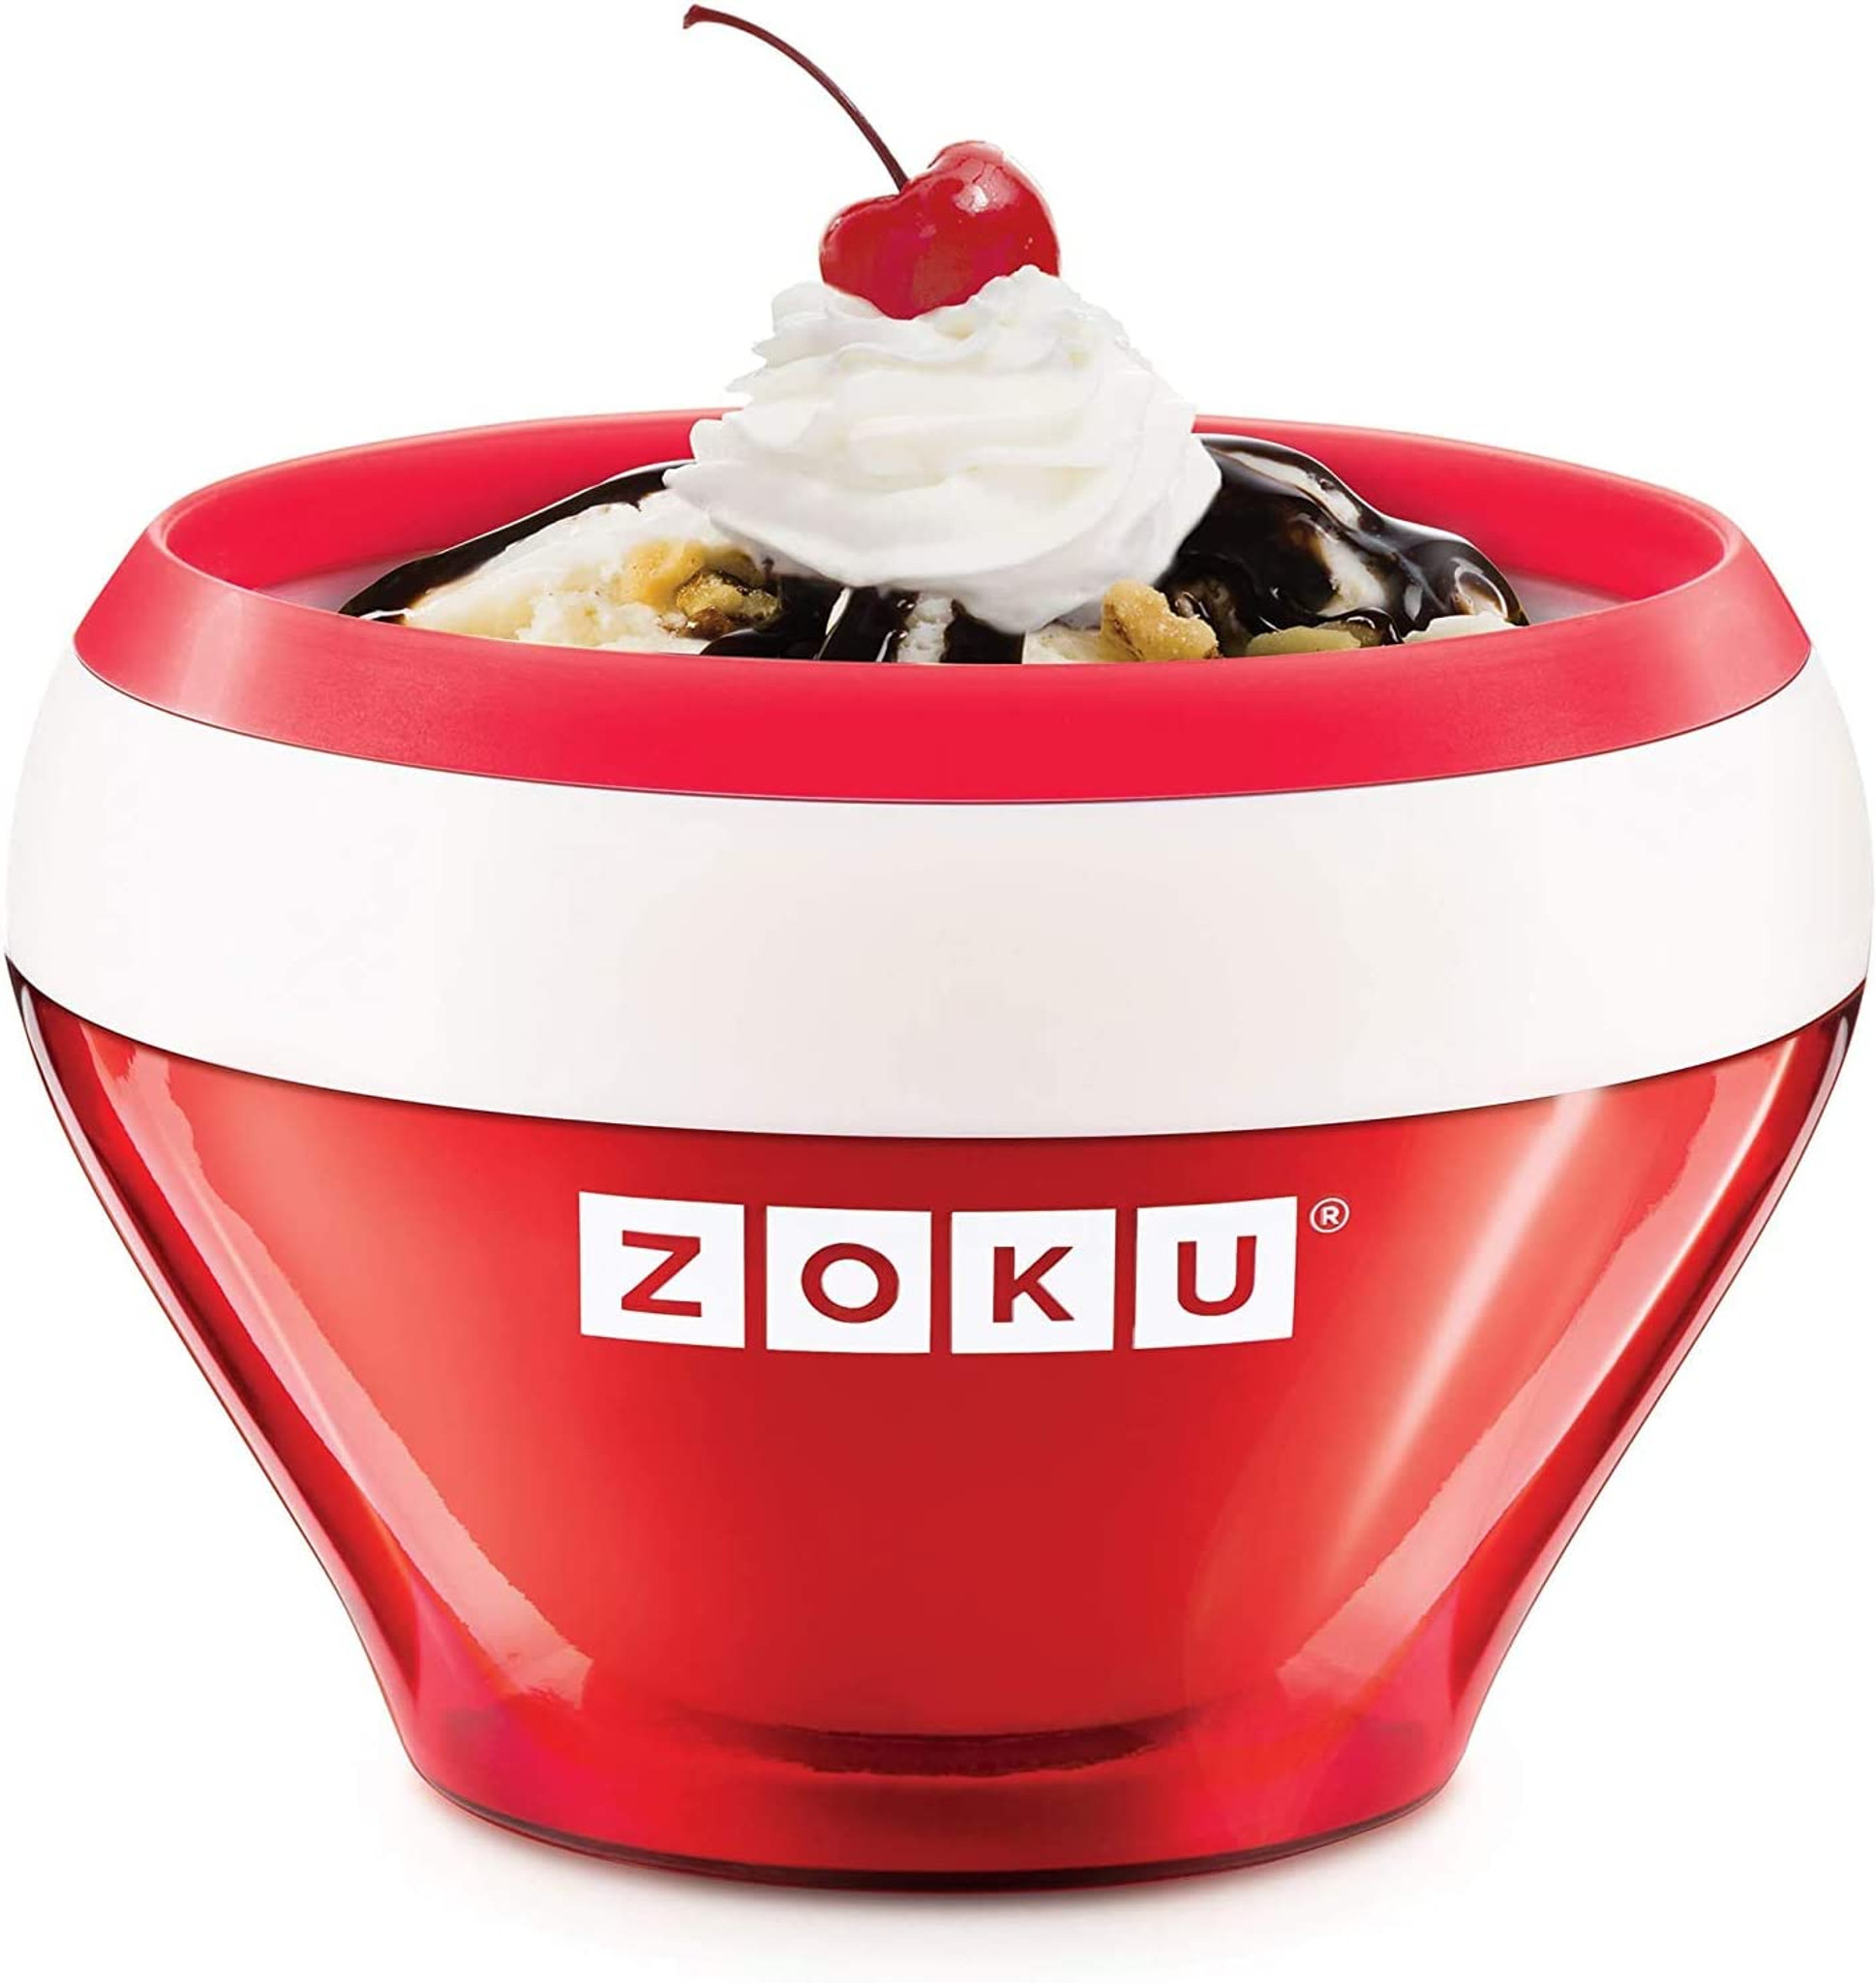 Zoku Ice Cream Maker Red & Available in other color